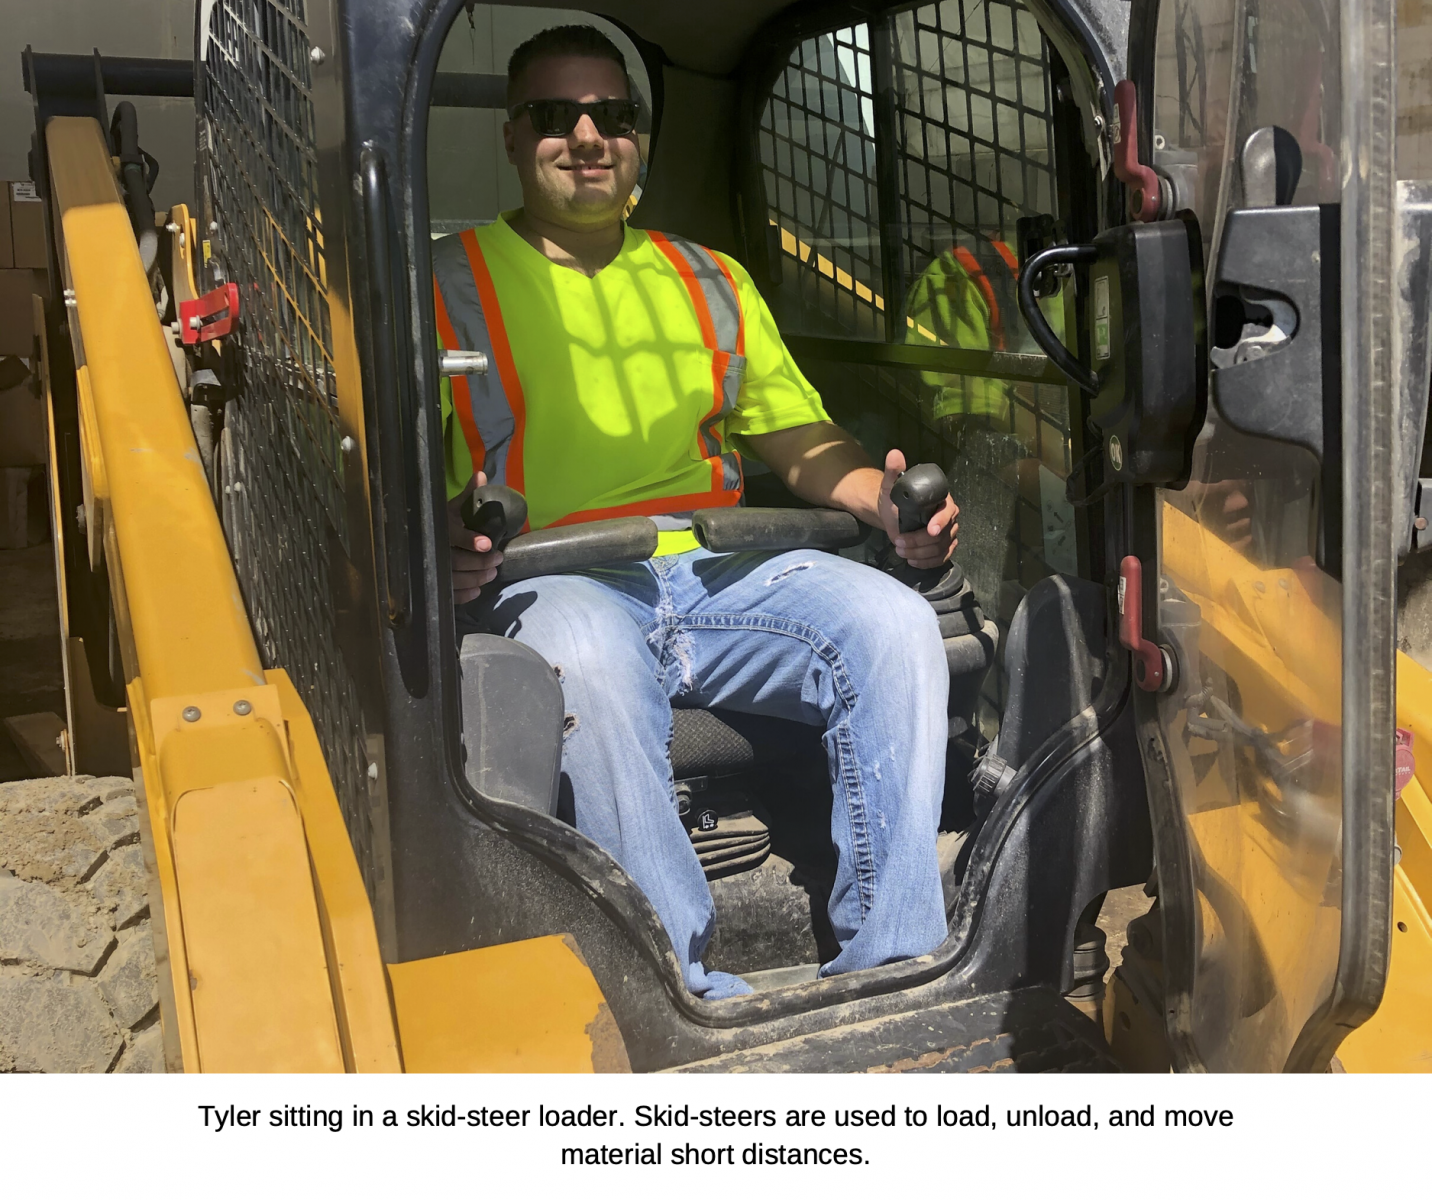 Tyler sitting in a skid-steer loader. Skid-steers are used to load, unload, and move material short distances.